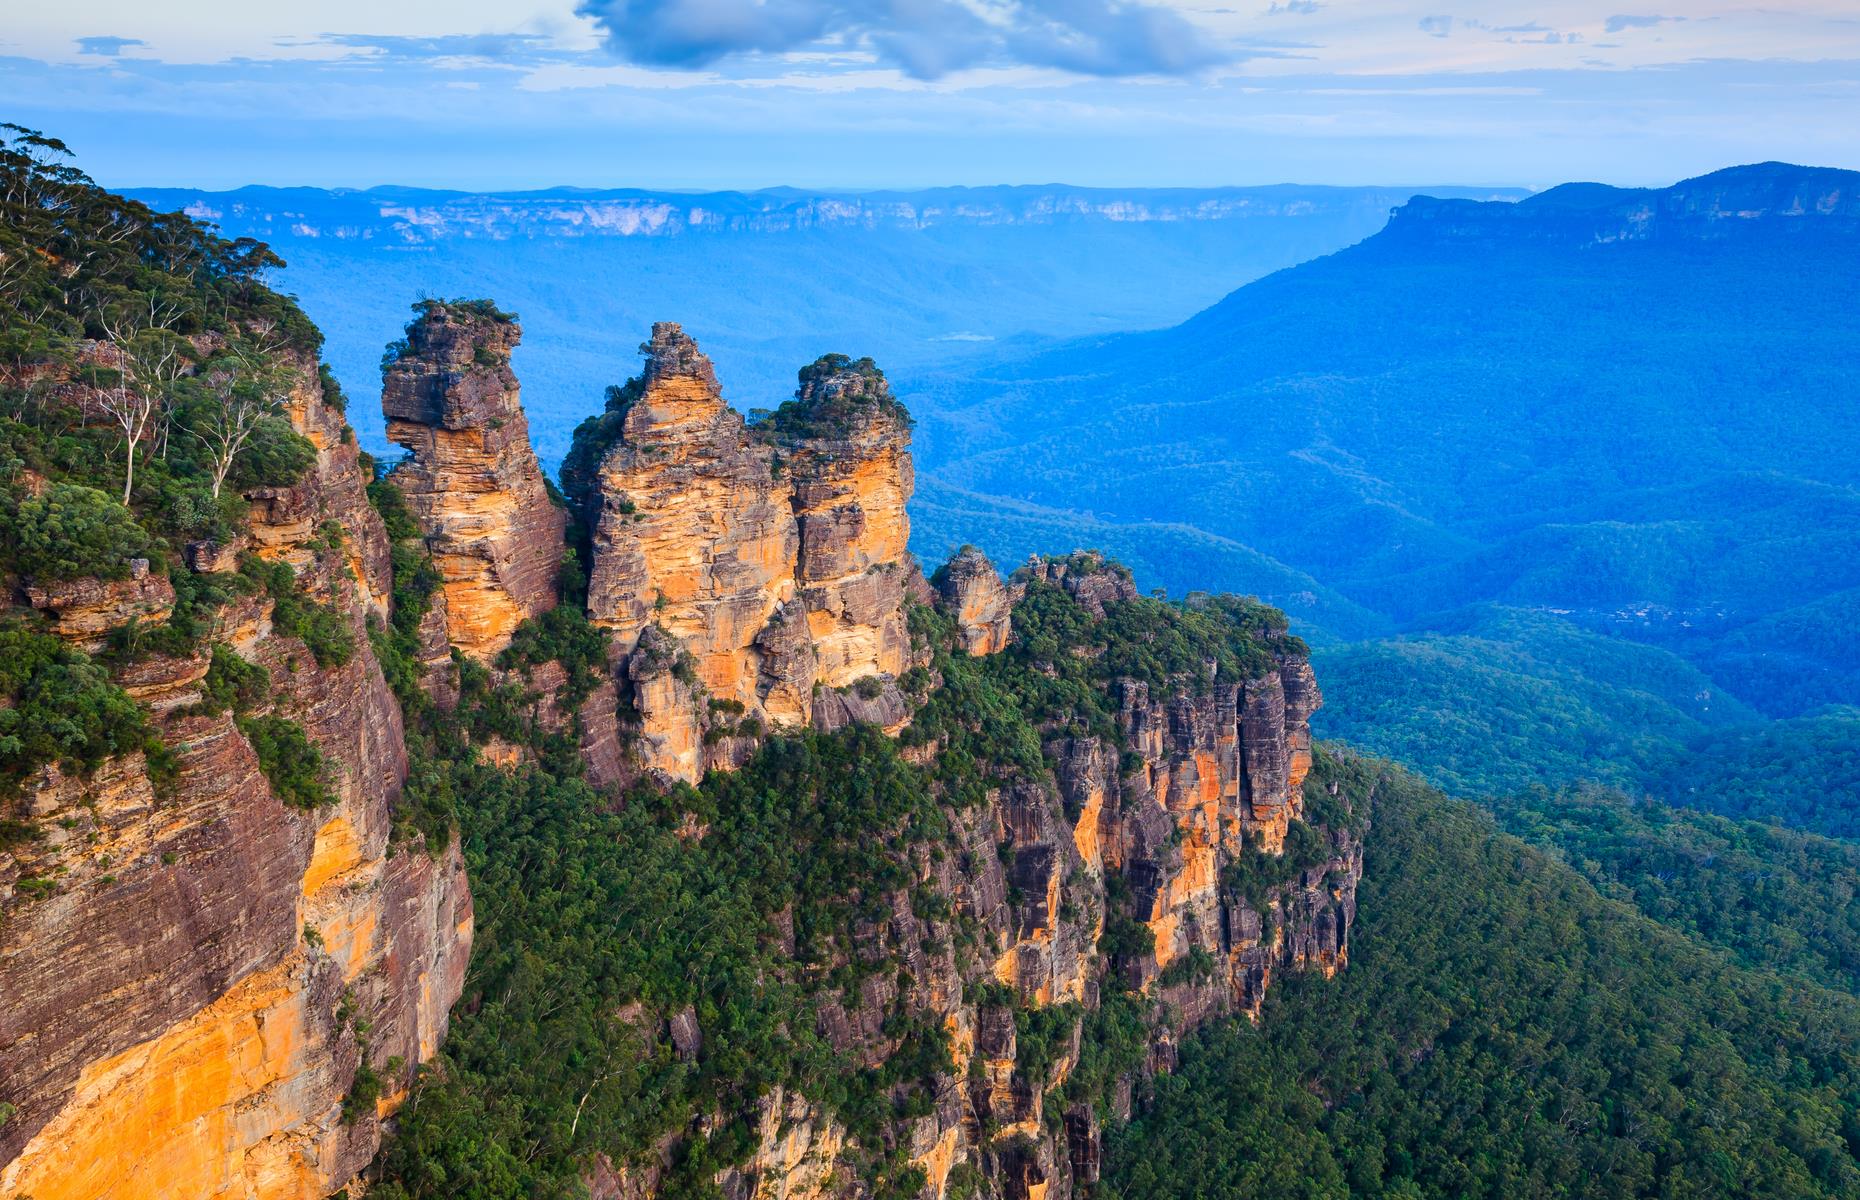 Tangles of native bushland, waterfalls, forested valleys, cliffs and caves – the scenery in the Greater Blue Mountains World Heritage Area is nothing short of spectacular. The area’s most famous landmark is the Three Sisters. According to Aboriginal legend, the towering rocks represent three sisters who were turned to stone. The sisters are best admired from Echo Point Lookout or get a closer look by following a walking trail to the top via Honeymoon Bridge.